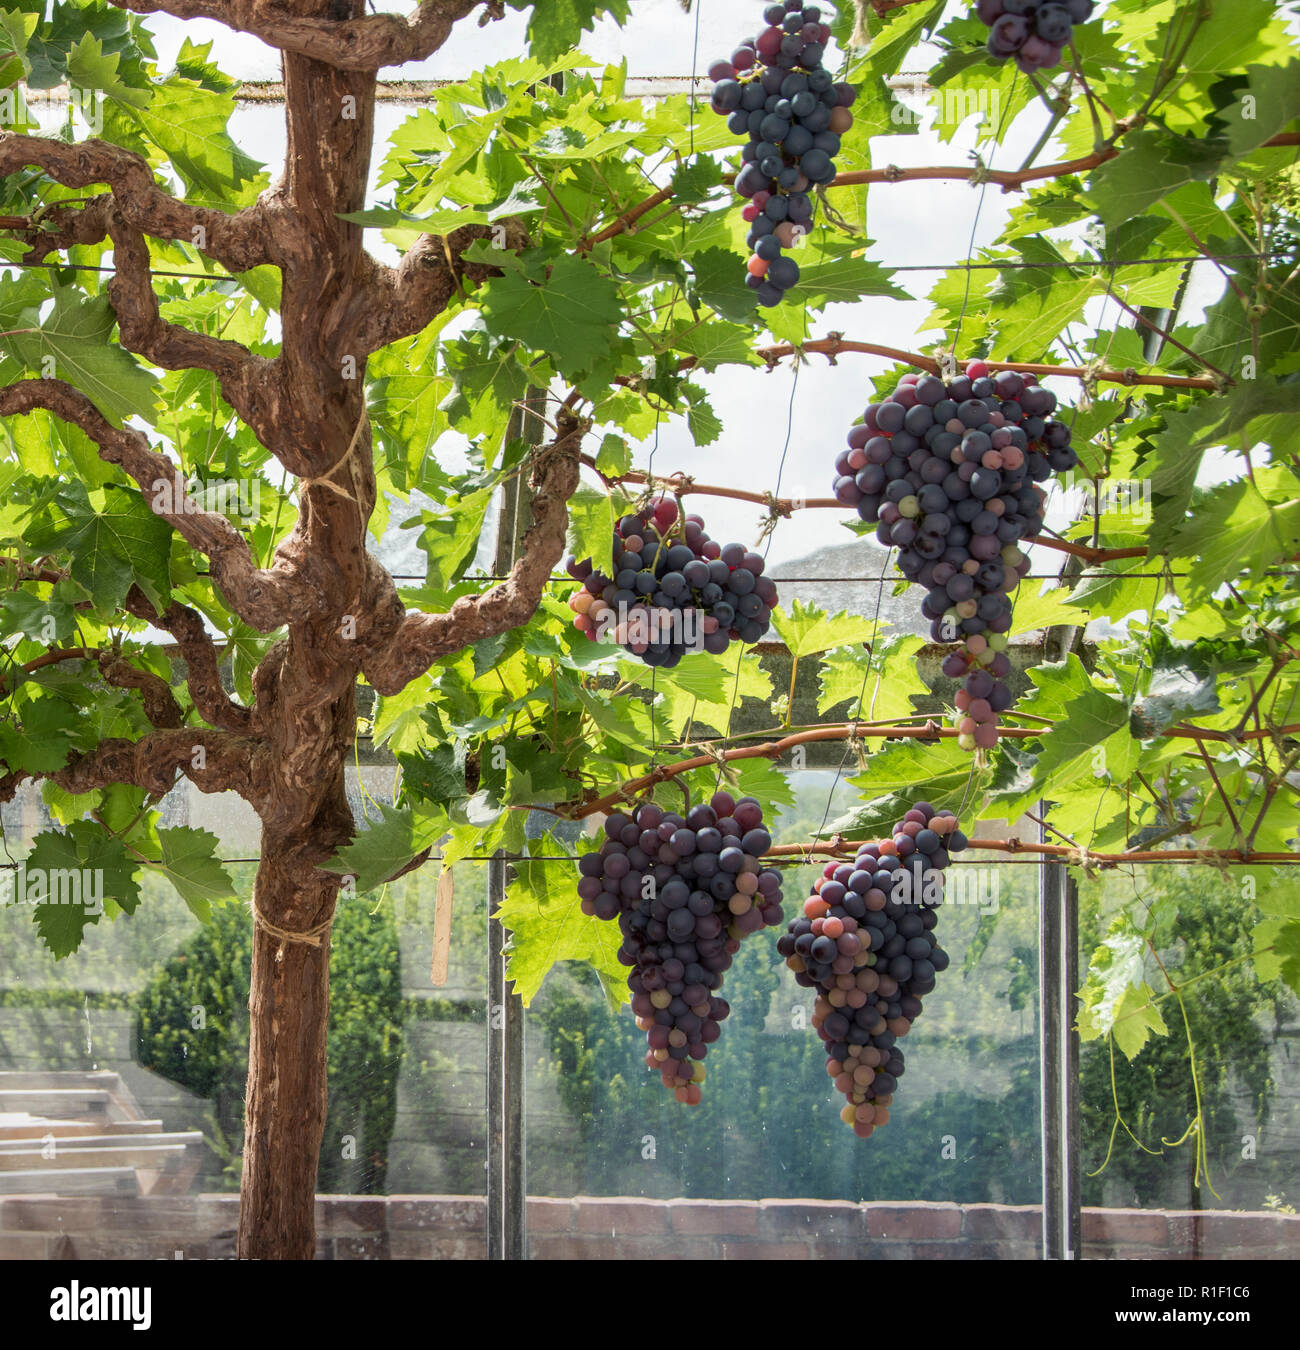 Grapes growing on trained vines inside a greenhouse. Stock Photo